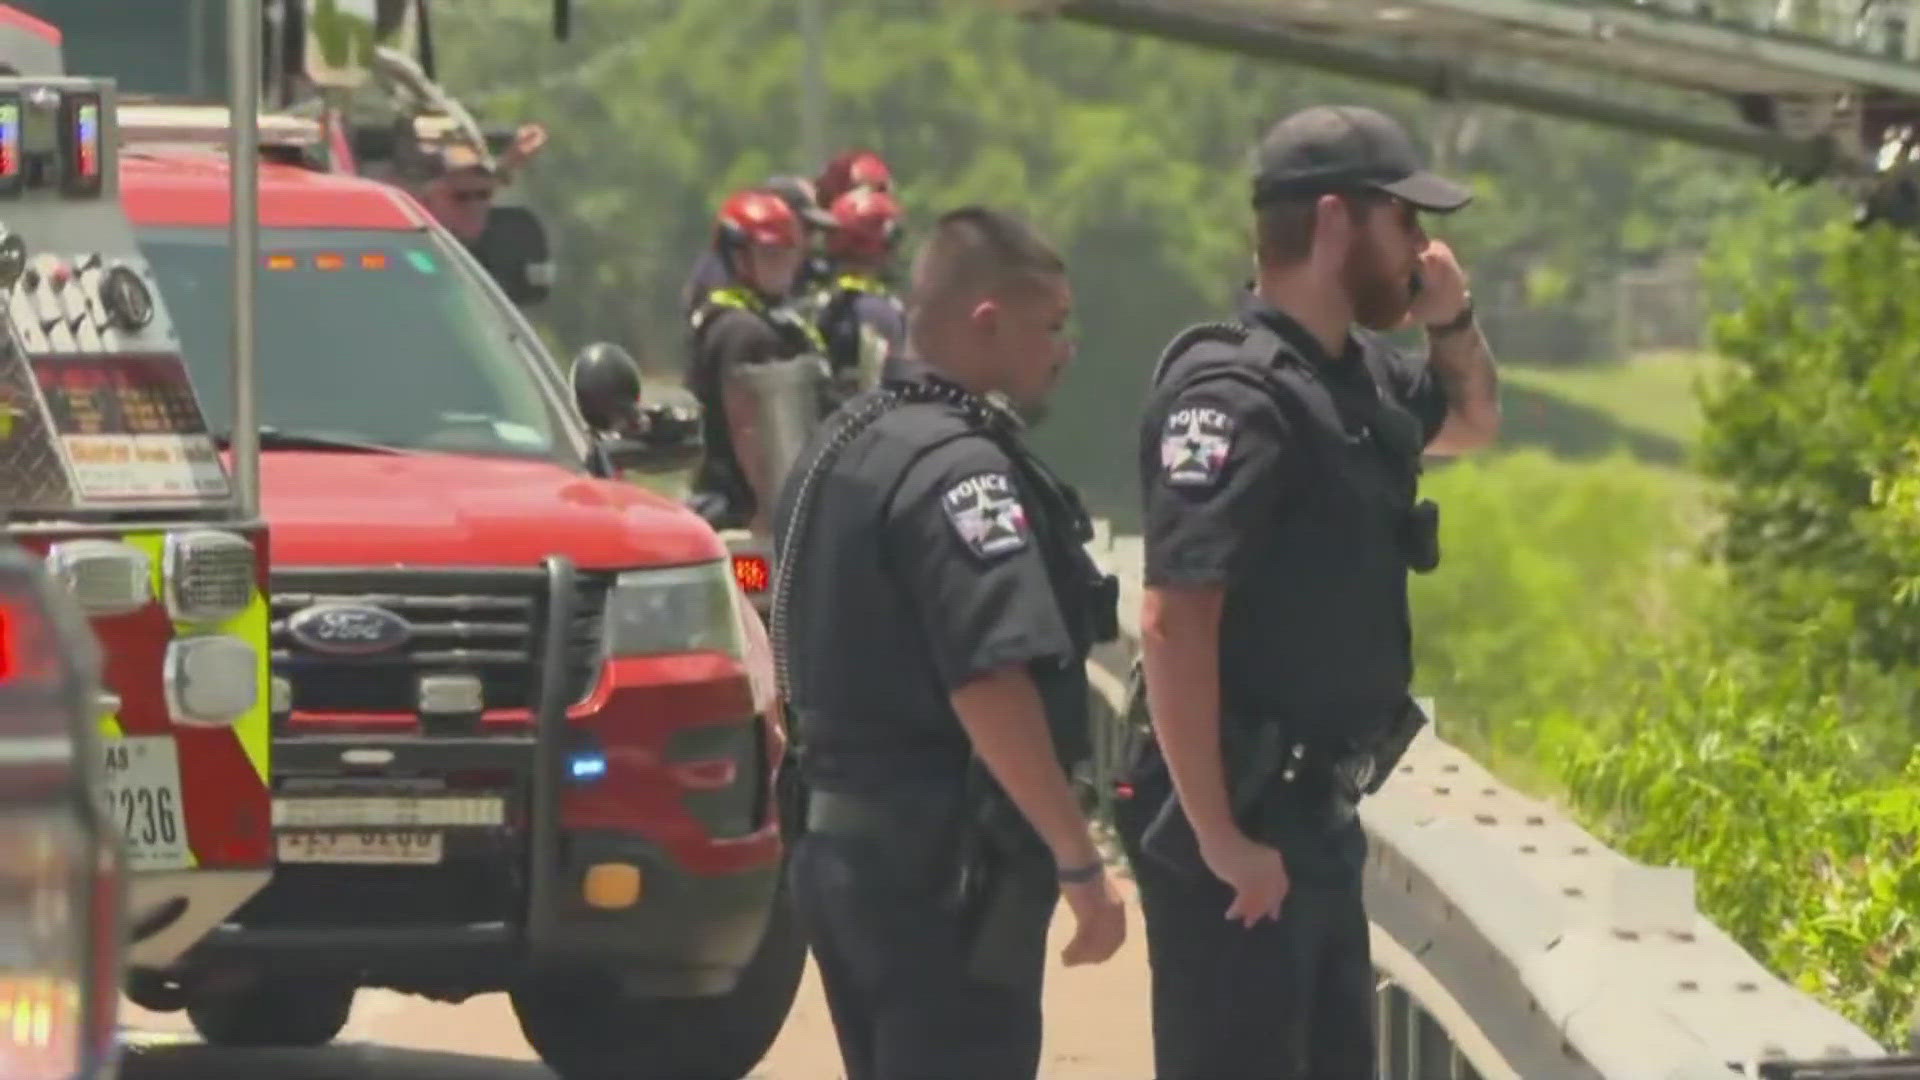 Officers responded to reports of a body floating in the river around 1:34 p.m. Sunday, June 23 near the East 4th Street bridge, Fort Worth Police said in a press rel